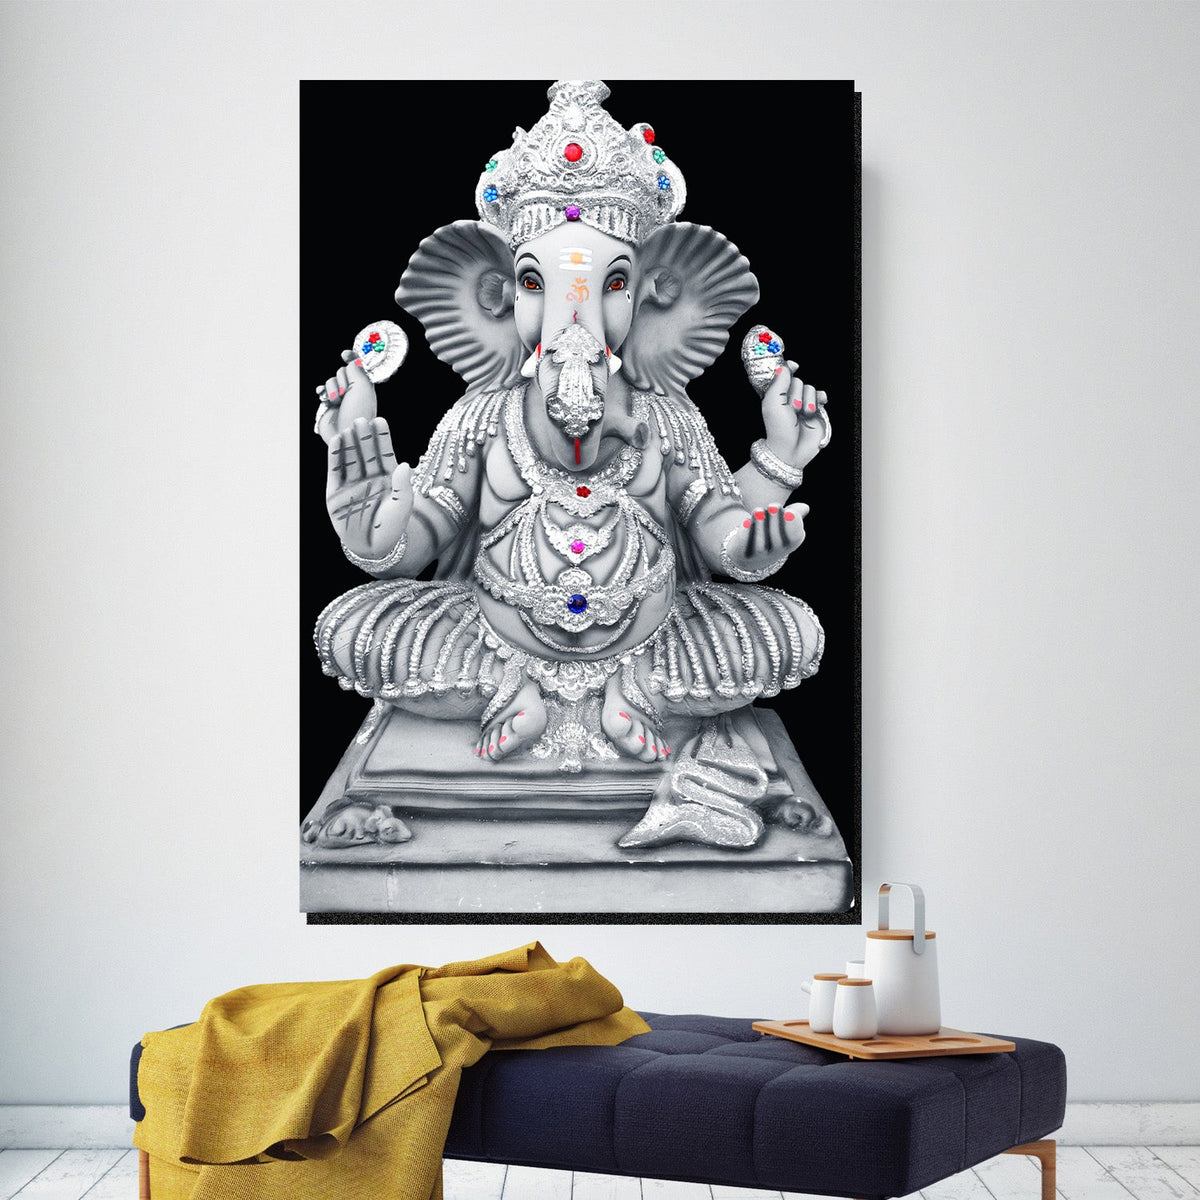 https://cdn.shopify.com/s/files/1/0387/9986/8044/products/AlmightyGaneshaCanvasArtprintStretched-3.jpg